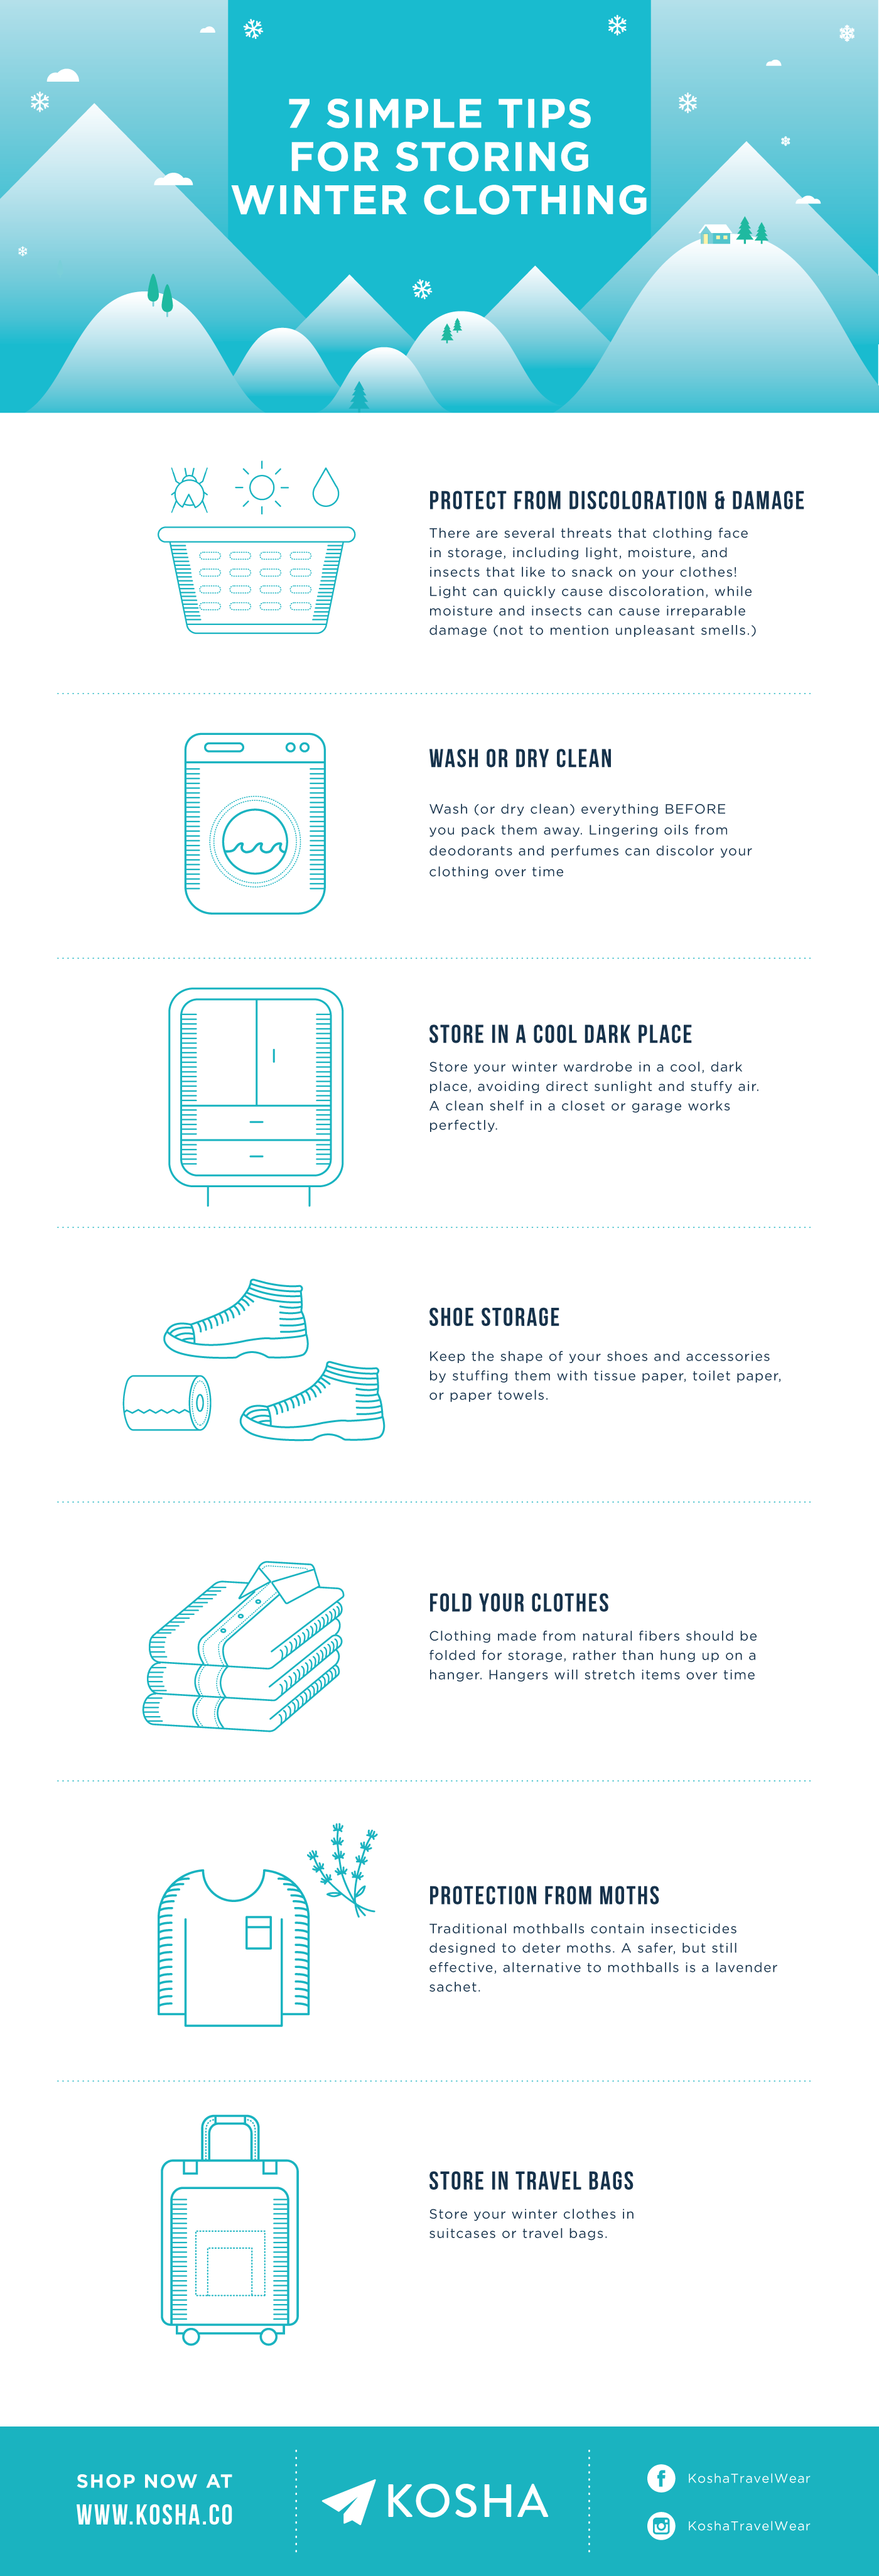 Helpful Tips for Storing Winter Clothes Off-Season